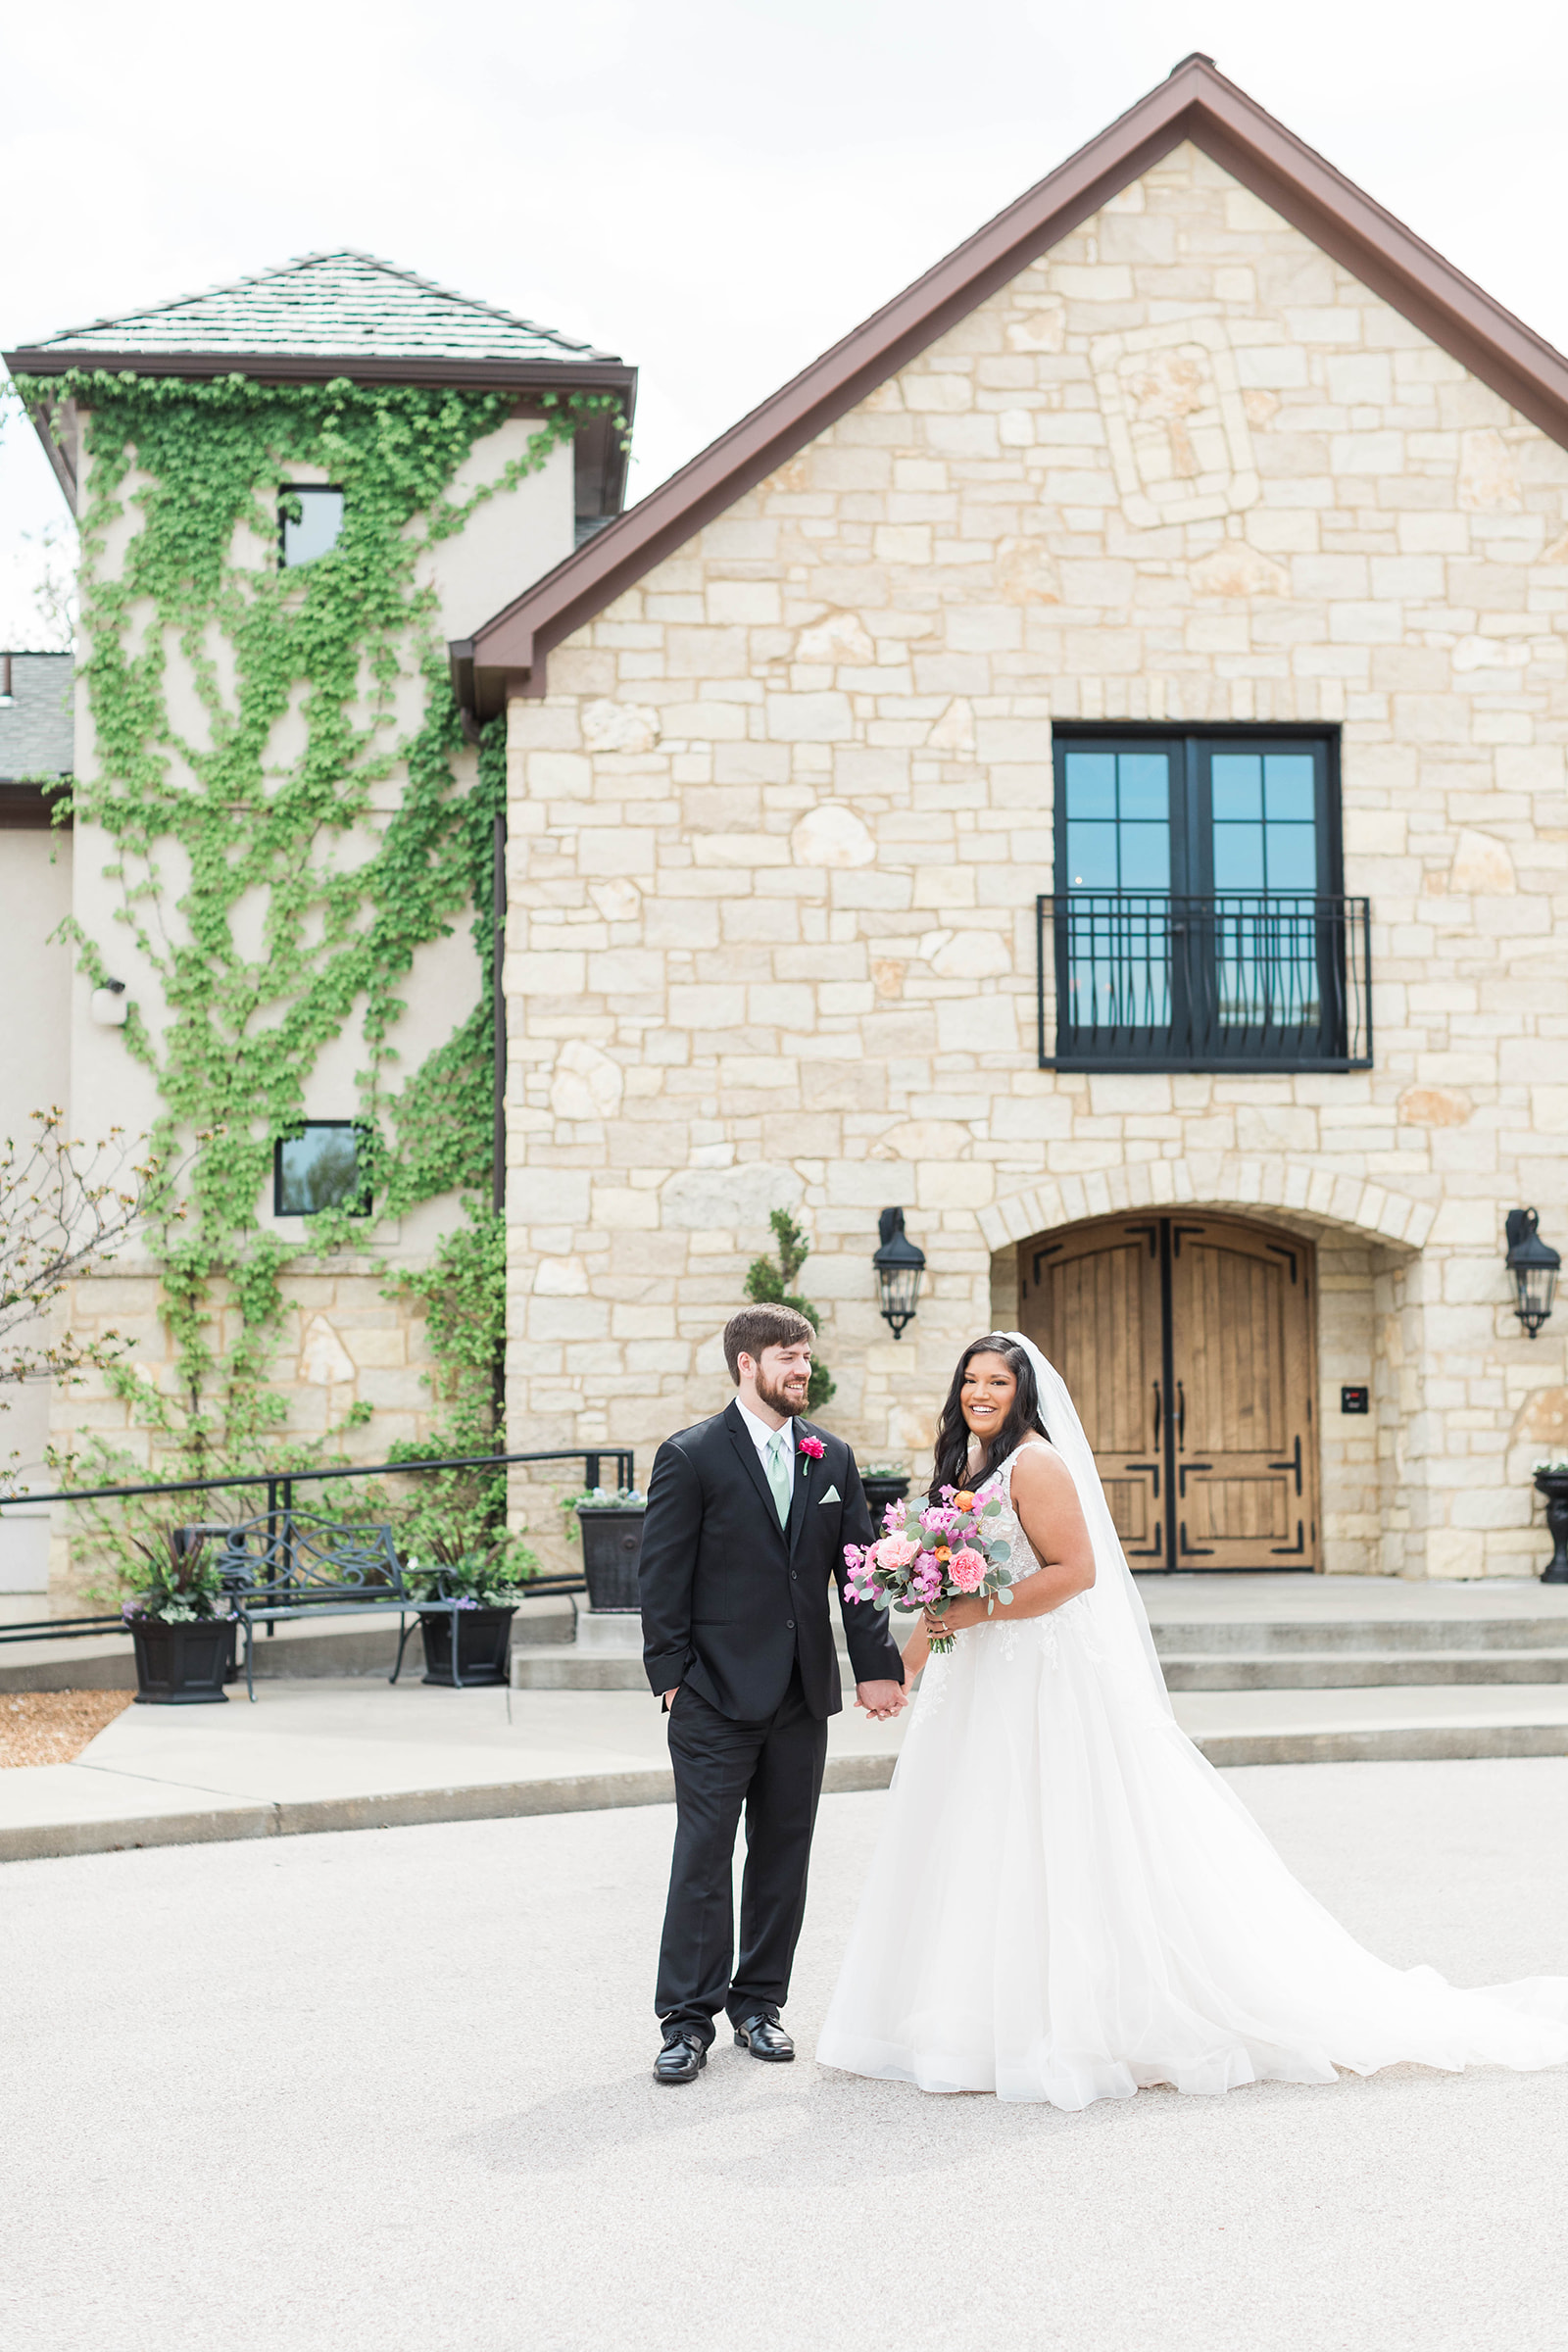 A bride and groom married at Silver Oaks Chateau in the spring